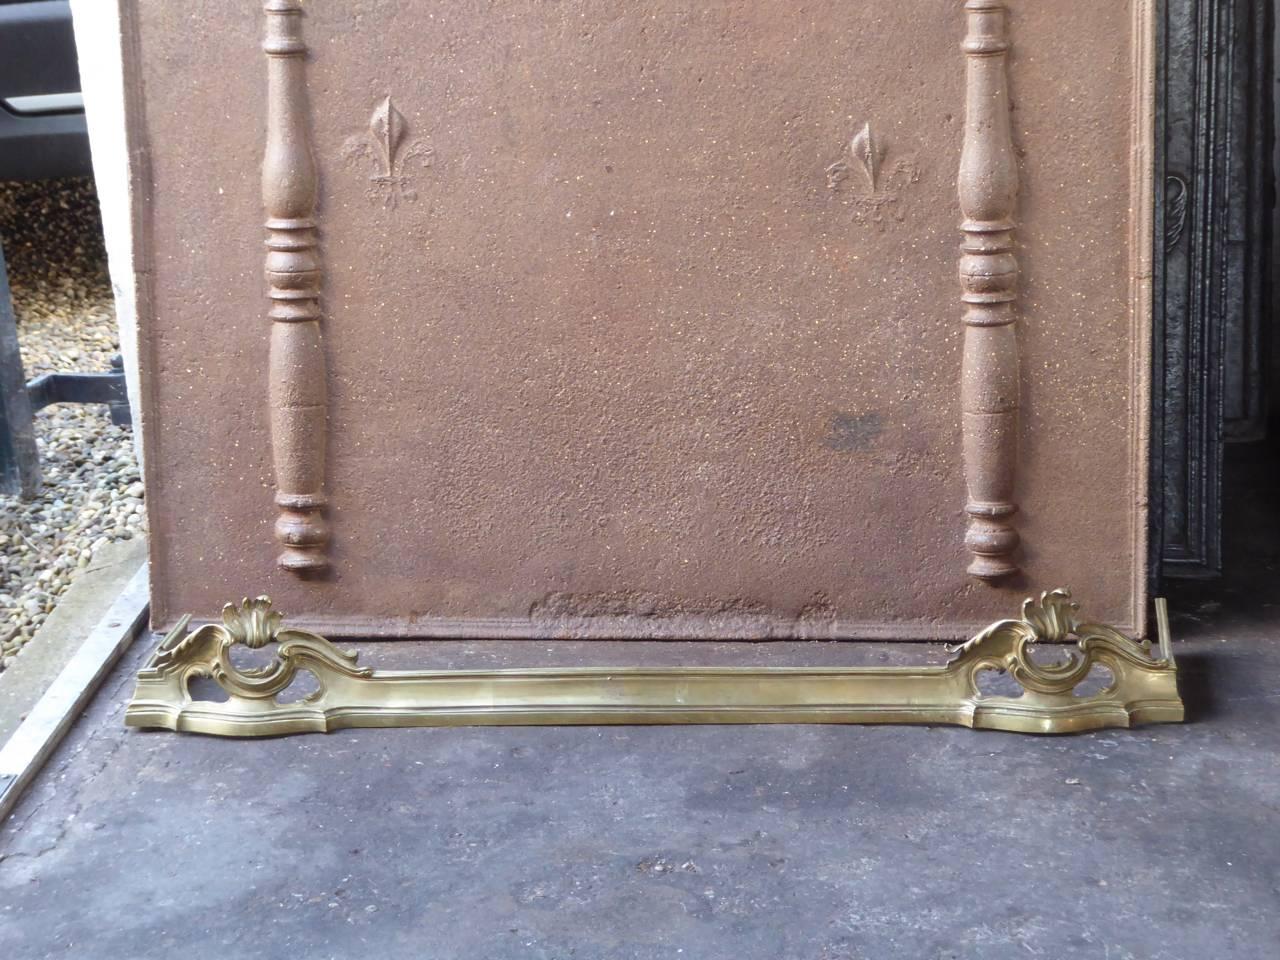 19th century French fire fender made of brass. Louis XV style.

